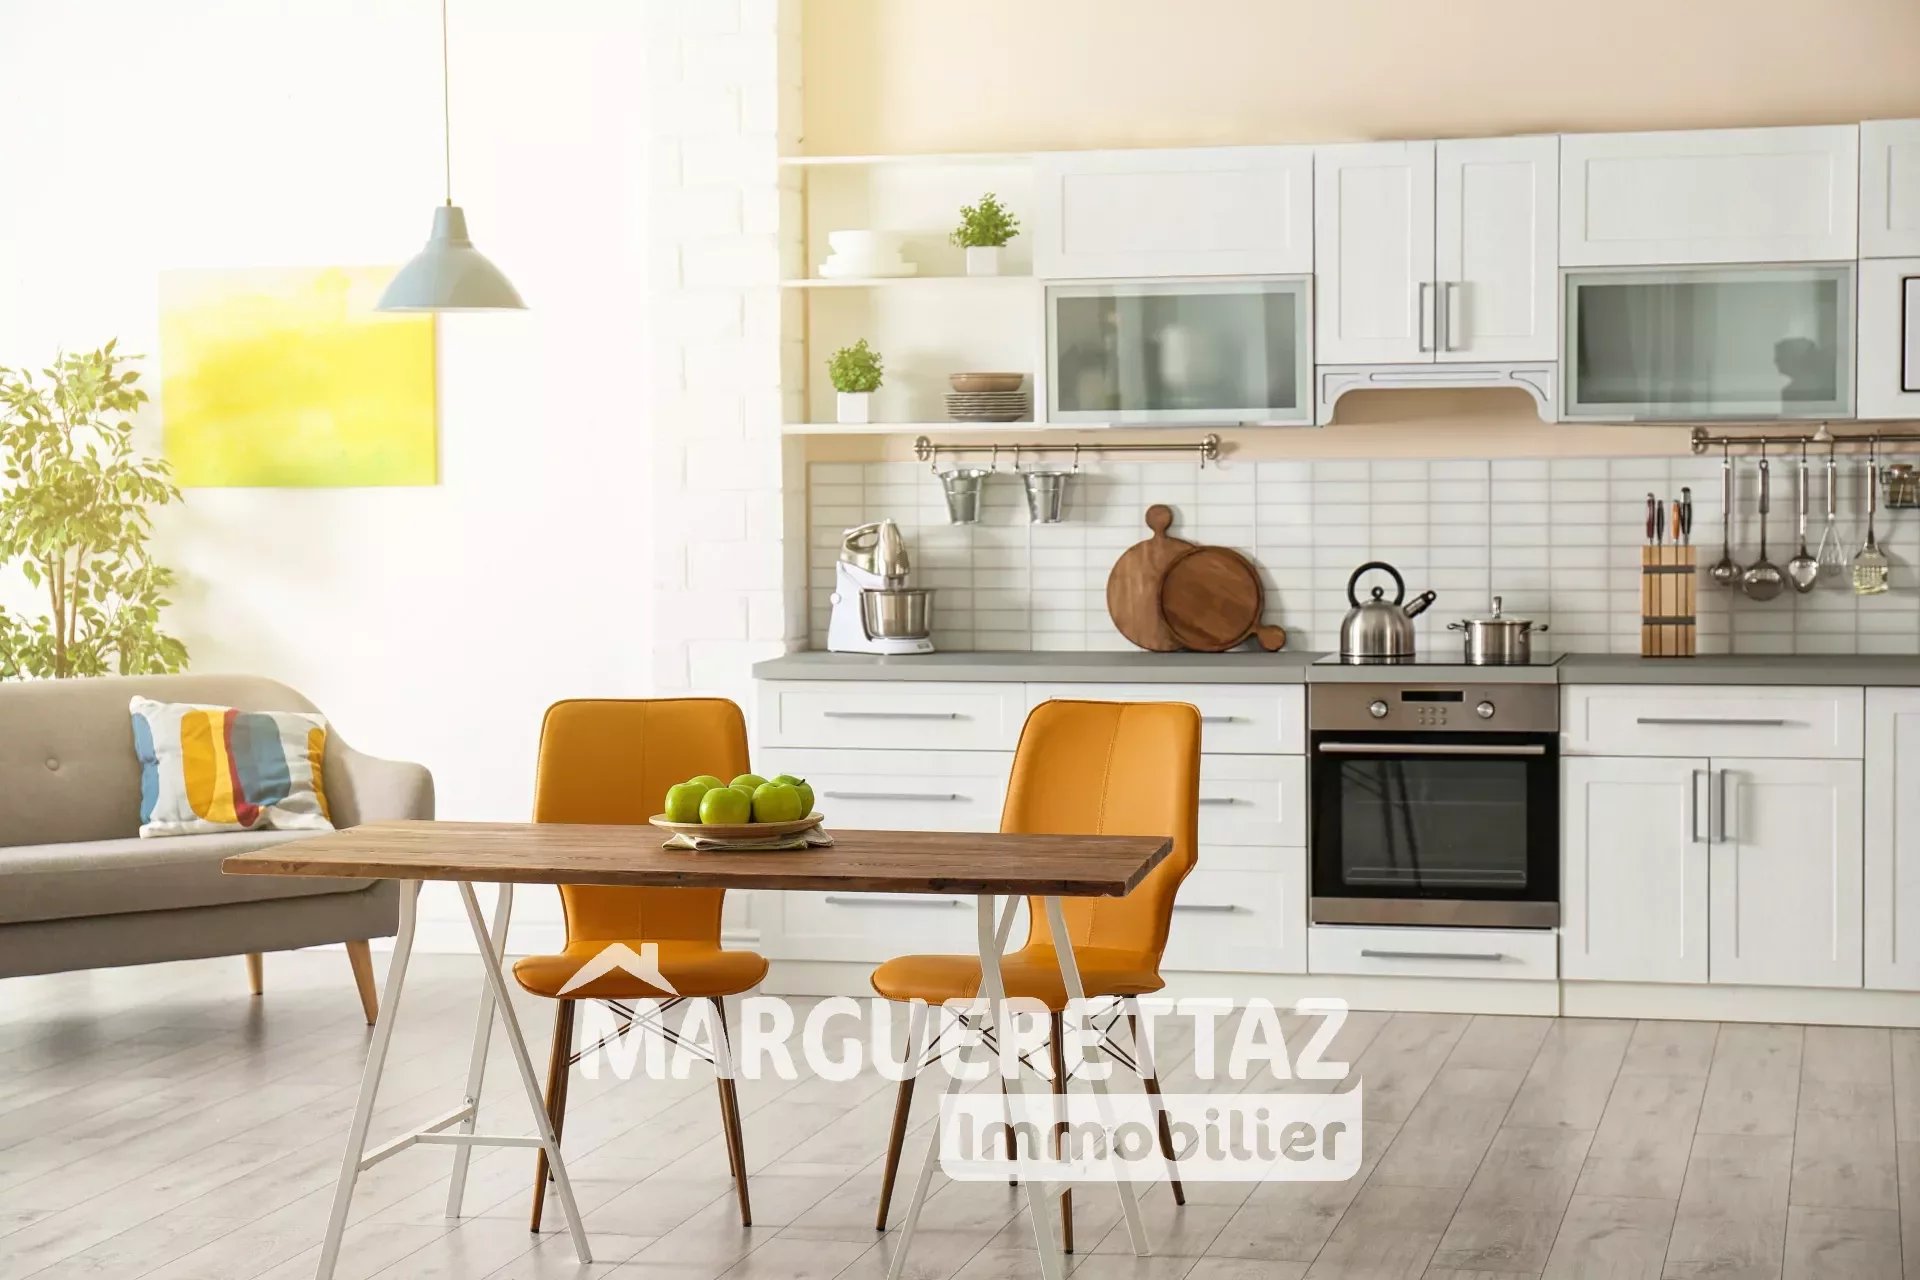 Stylish apartment interior with kitchen furniture and sofa